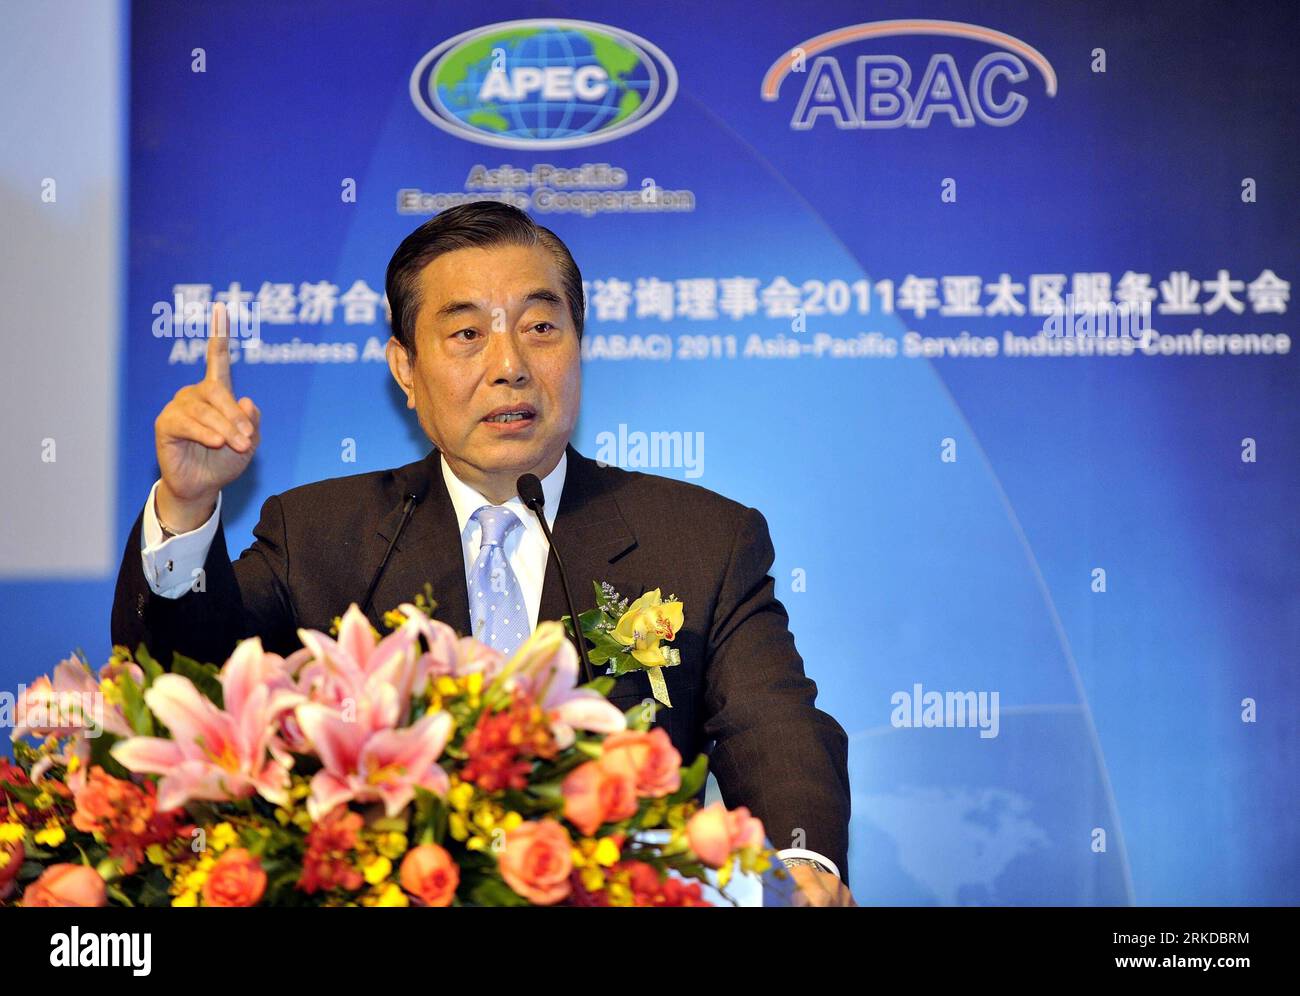 Bildnummer: 54906864  Datum: 14.02.2011  Copyright: imago/Xinhua (110214) -- GUANGZHOU, Feb. 14, 2011 (Xinhua) -- Dr. Chih-Kang Wang, chairman of Taipei World Trade Center Co., Ltd, delivers a speech at the Asia-Pacific Economic Cooperation (APEC) Business Advisory Council 2011 Asia-Pacific Service Industries Conference in Guangzhou, capital of south China s Guangdong Province, Feb. 14, 2011. Famous economists and scholars made speeches at the conference in Guangzhou Monday on the development of service industries in the Asia-Pacific region. (Xinhua/Liu Dawei) (zhs) CHINA-GUANGZHOU-CHINA-GUANG Stock Photo